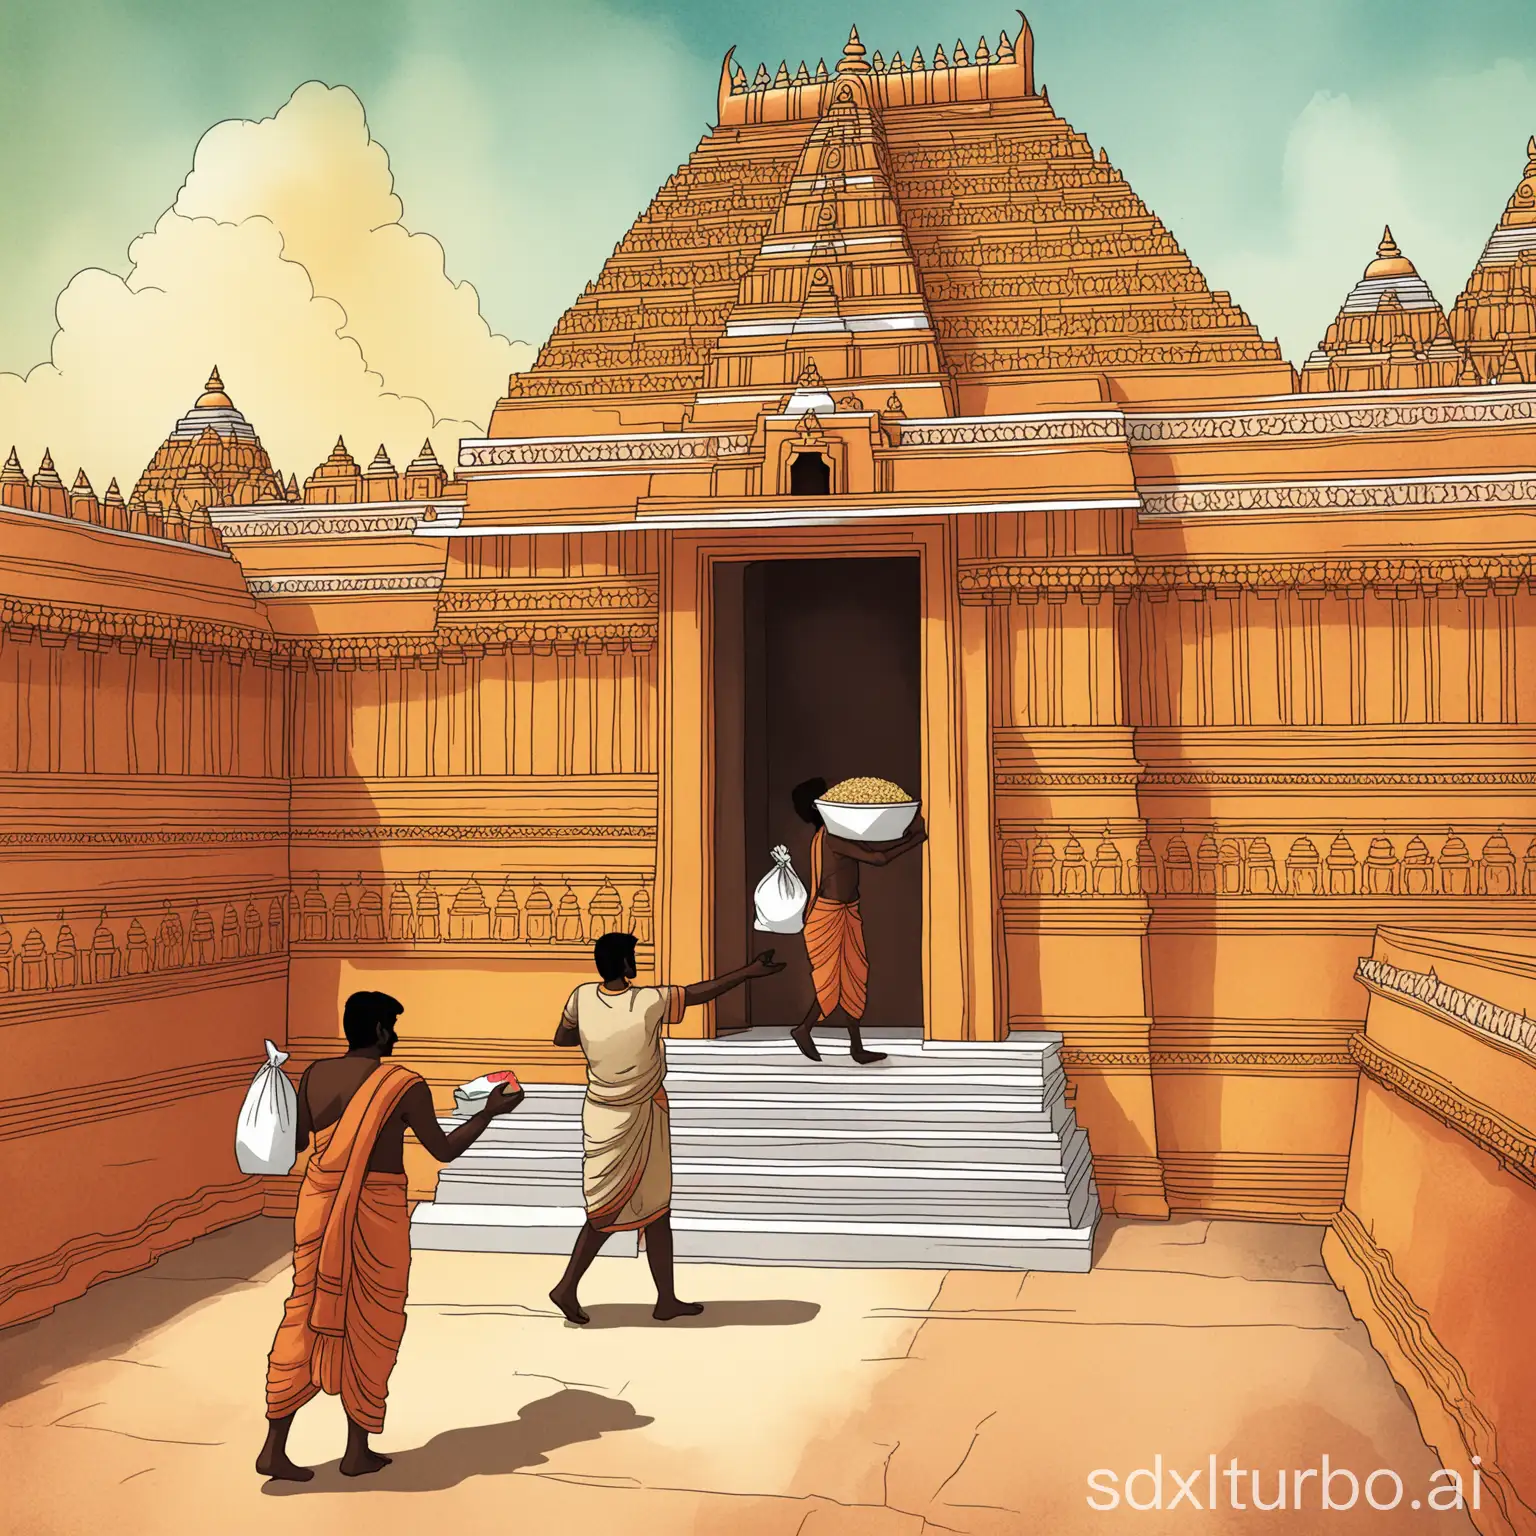 Illustration of a man delivering food packet to another person near a Srirangam temple